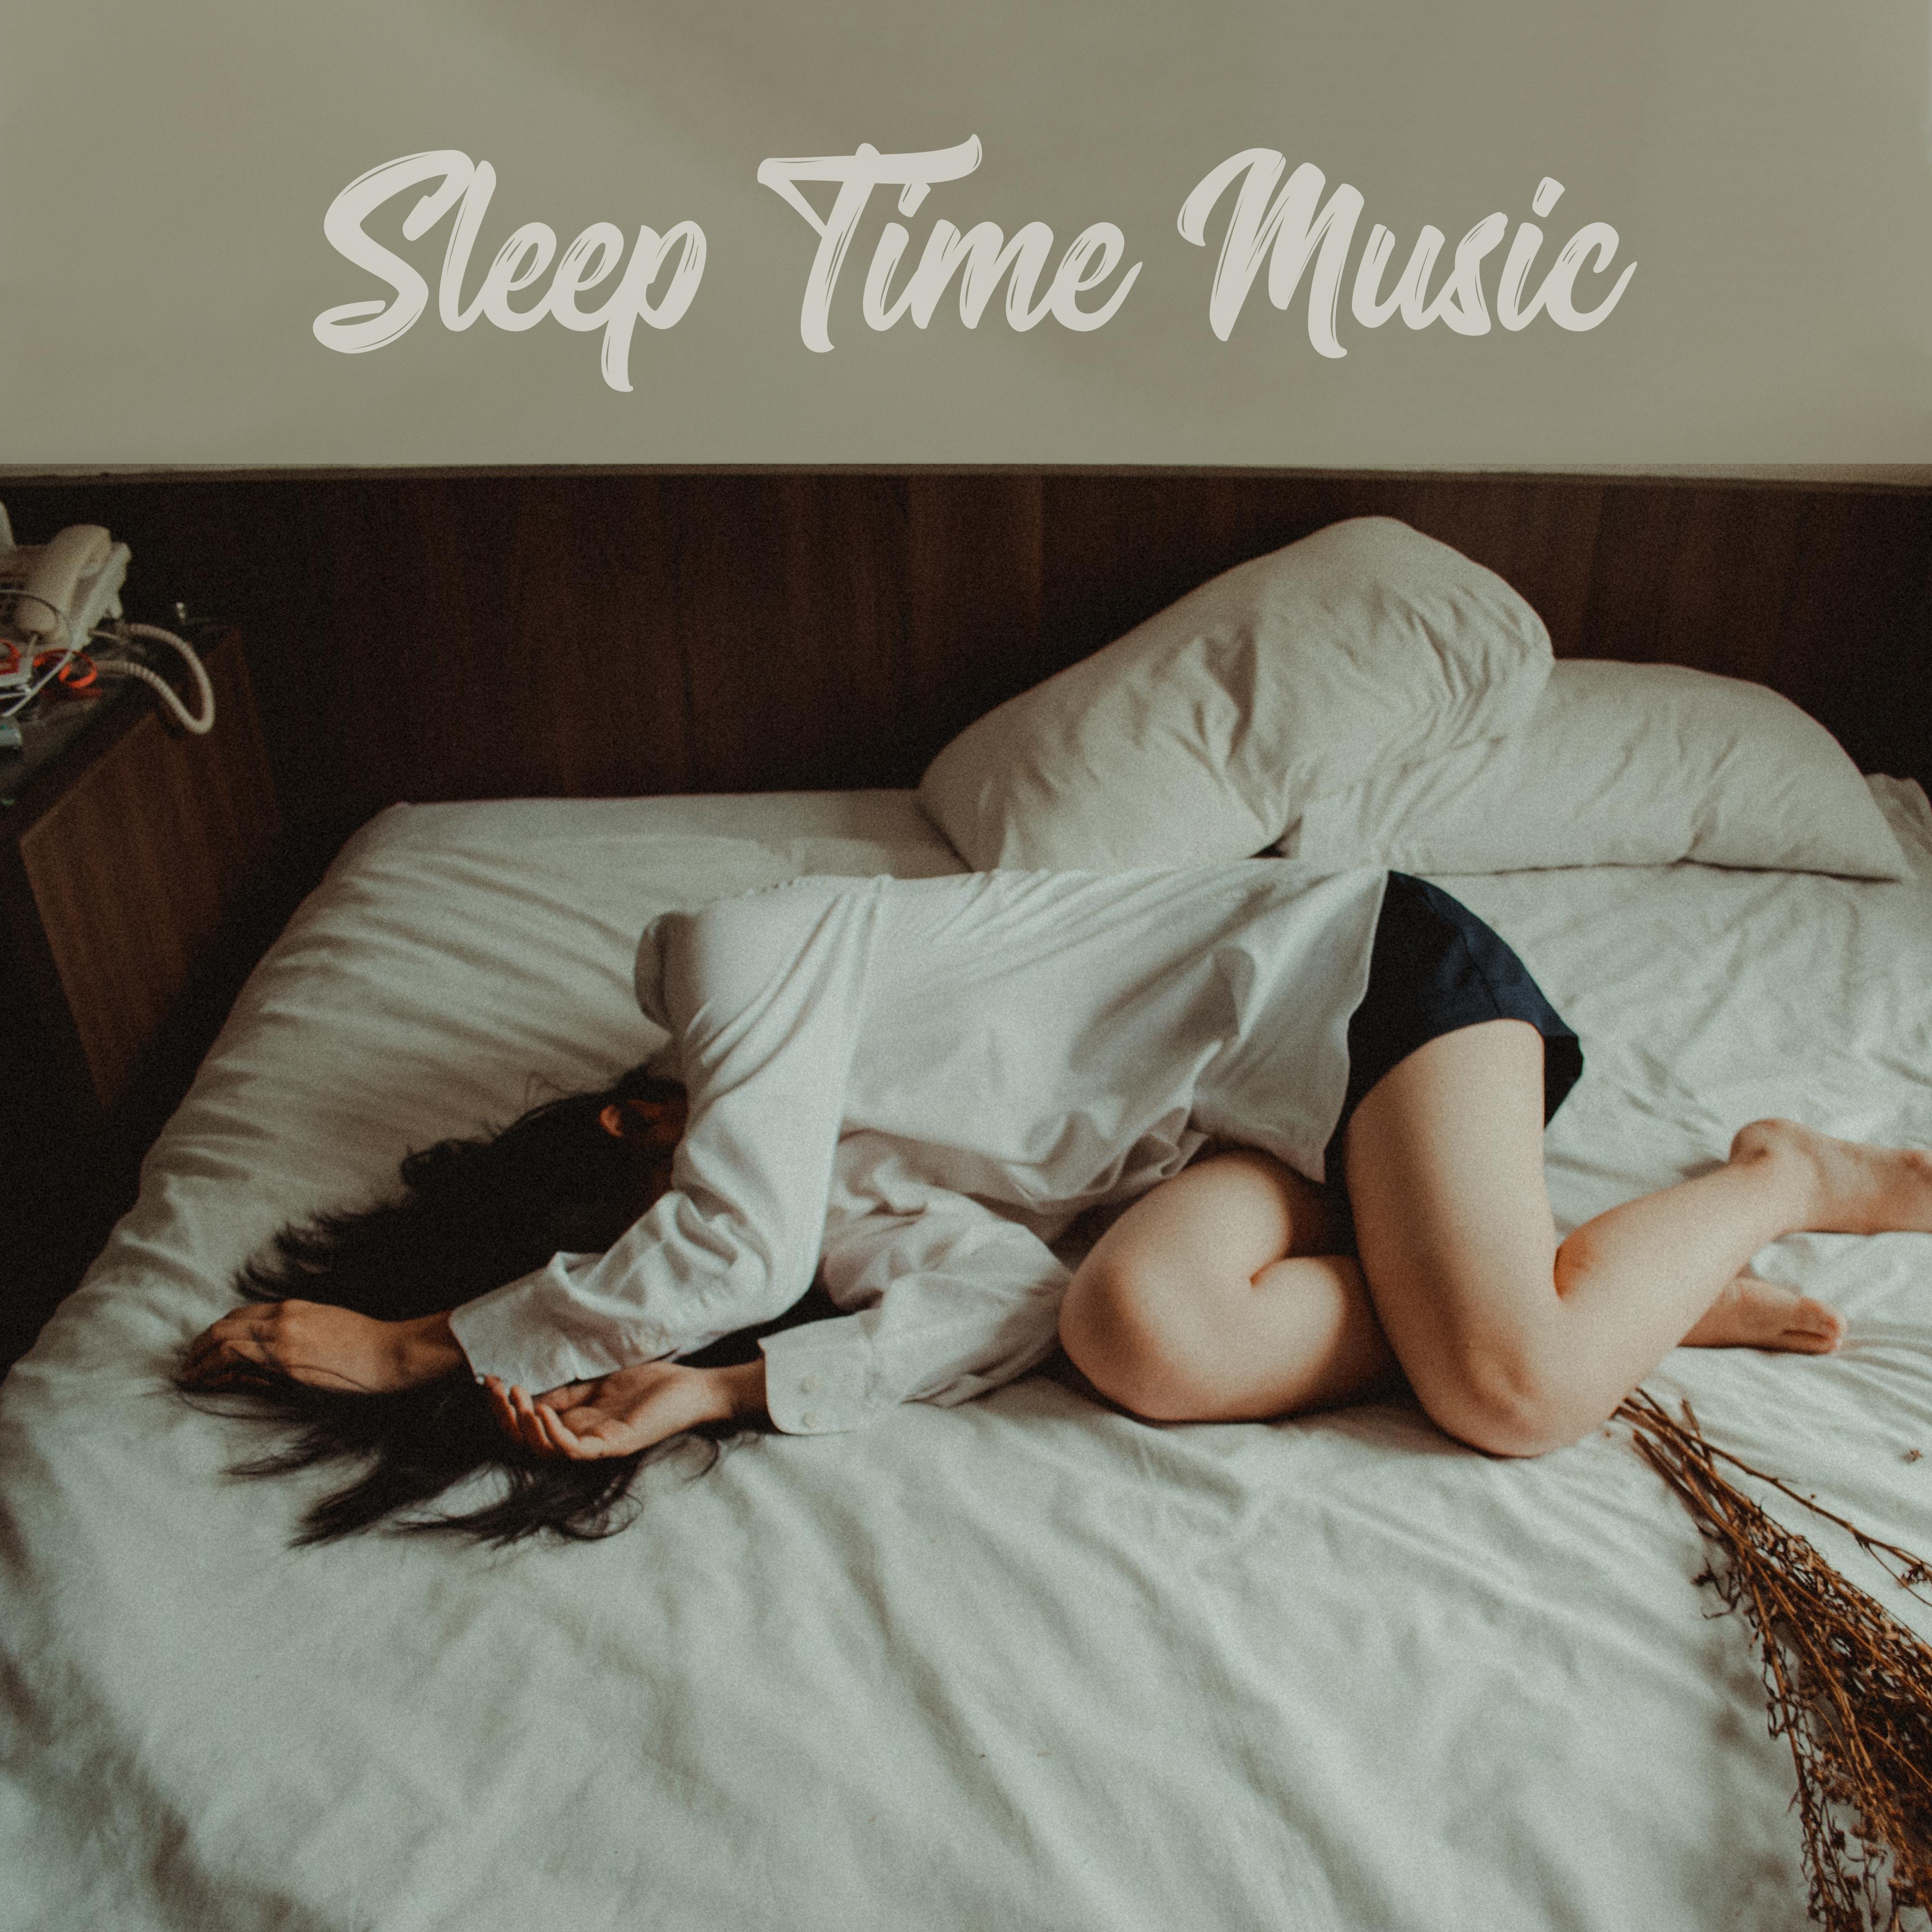 Sleep Time Music: New Age 2019 Soft & Sensual Songs for Perfect Sleep, Cure Insomnia, Recover Your Energy & Dream Beautiful